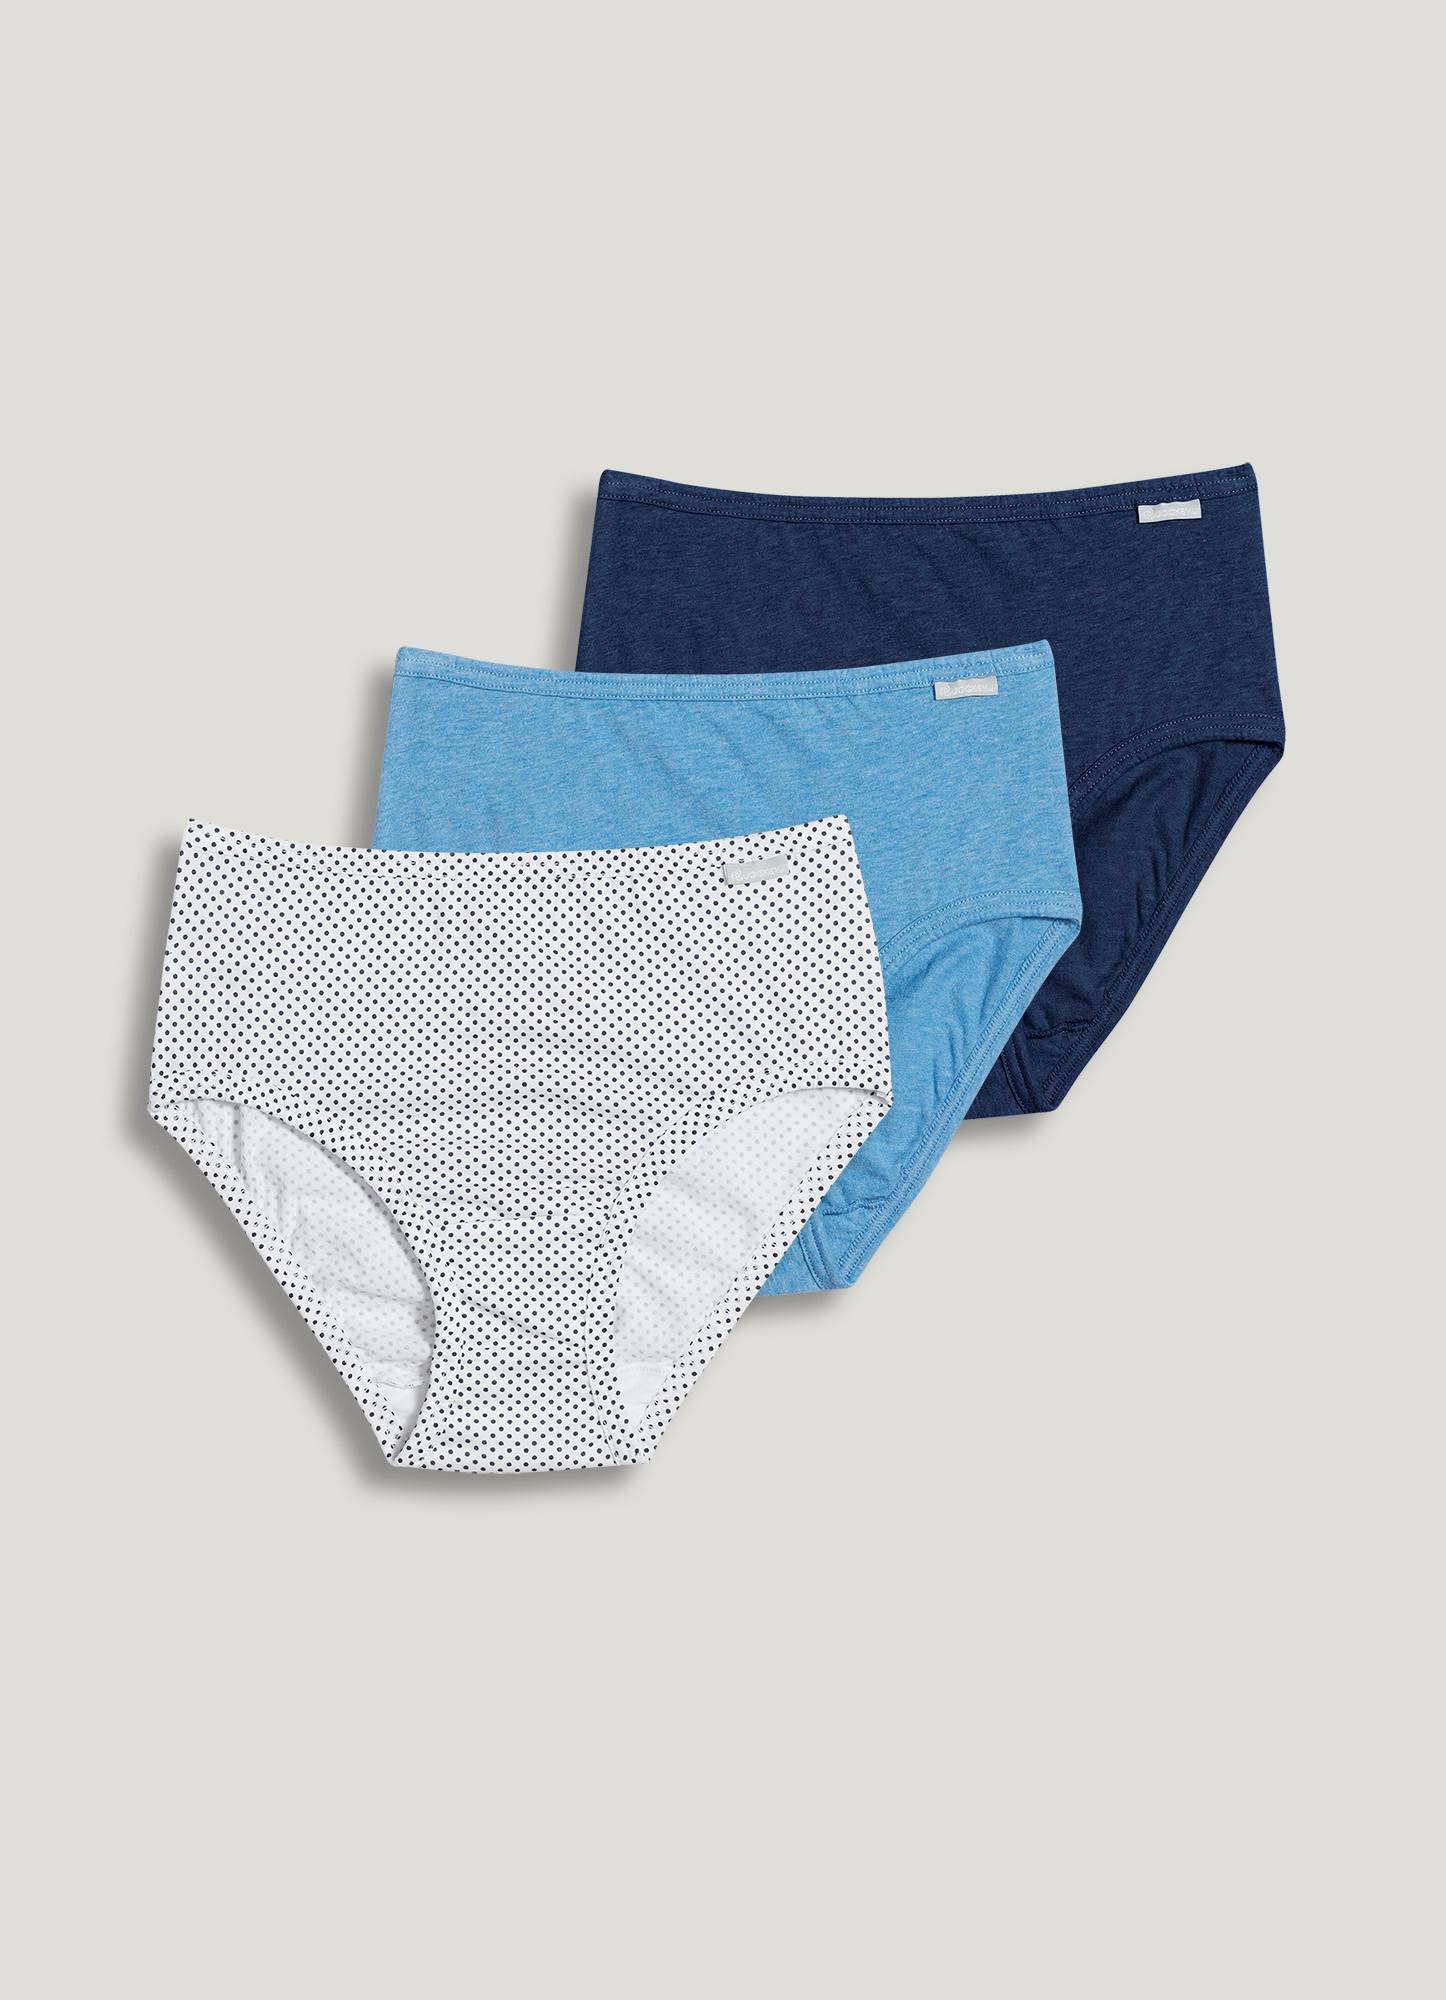 Buy JOCKEY Women's Cotton Hipster Brief(Assorted Pack Of 3